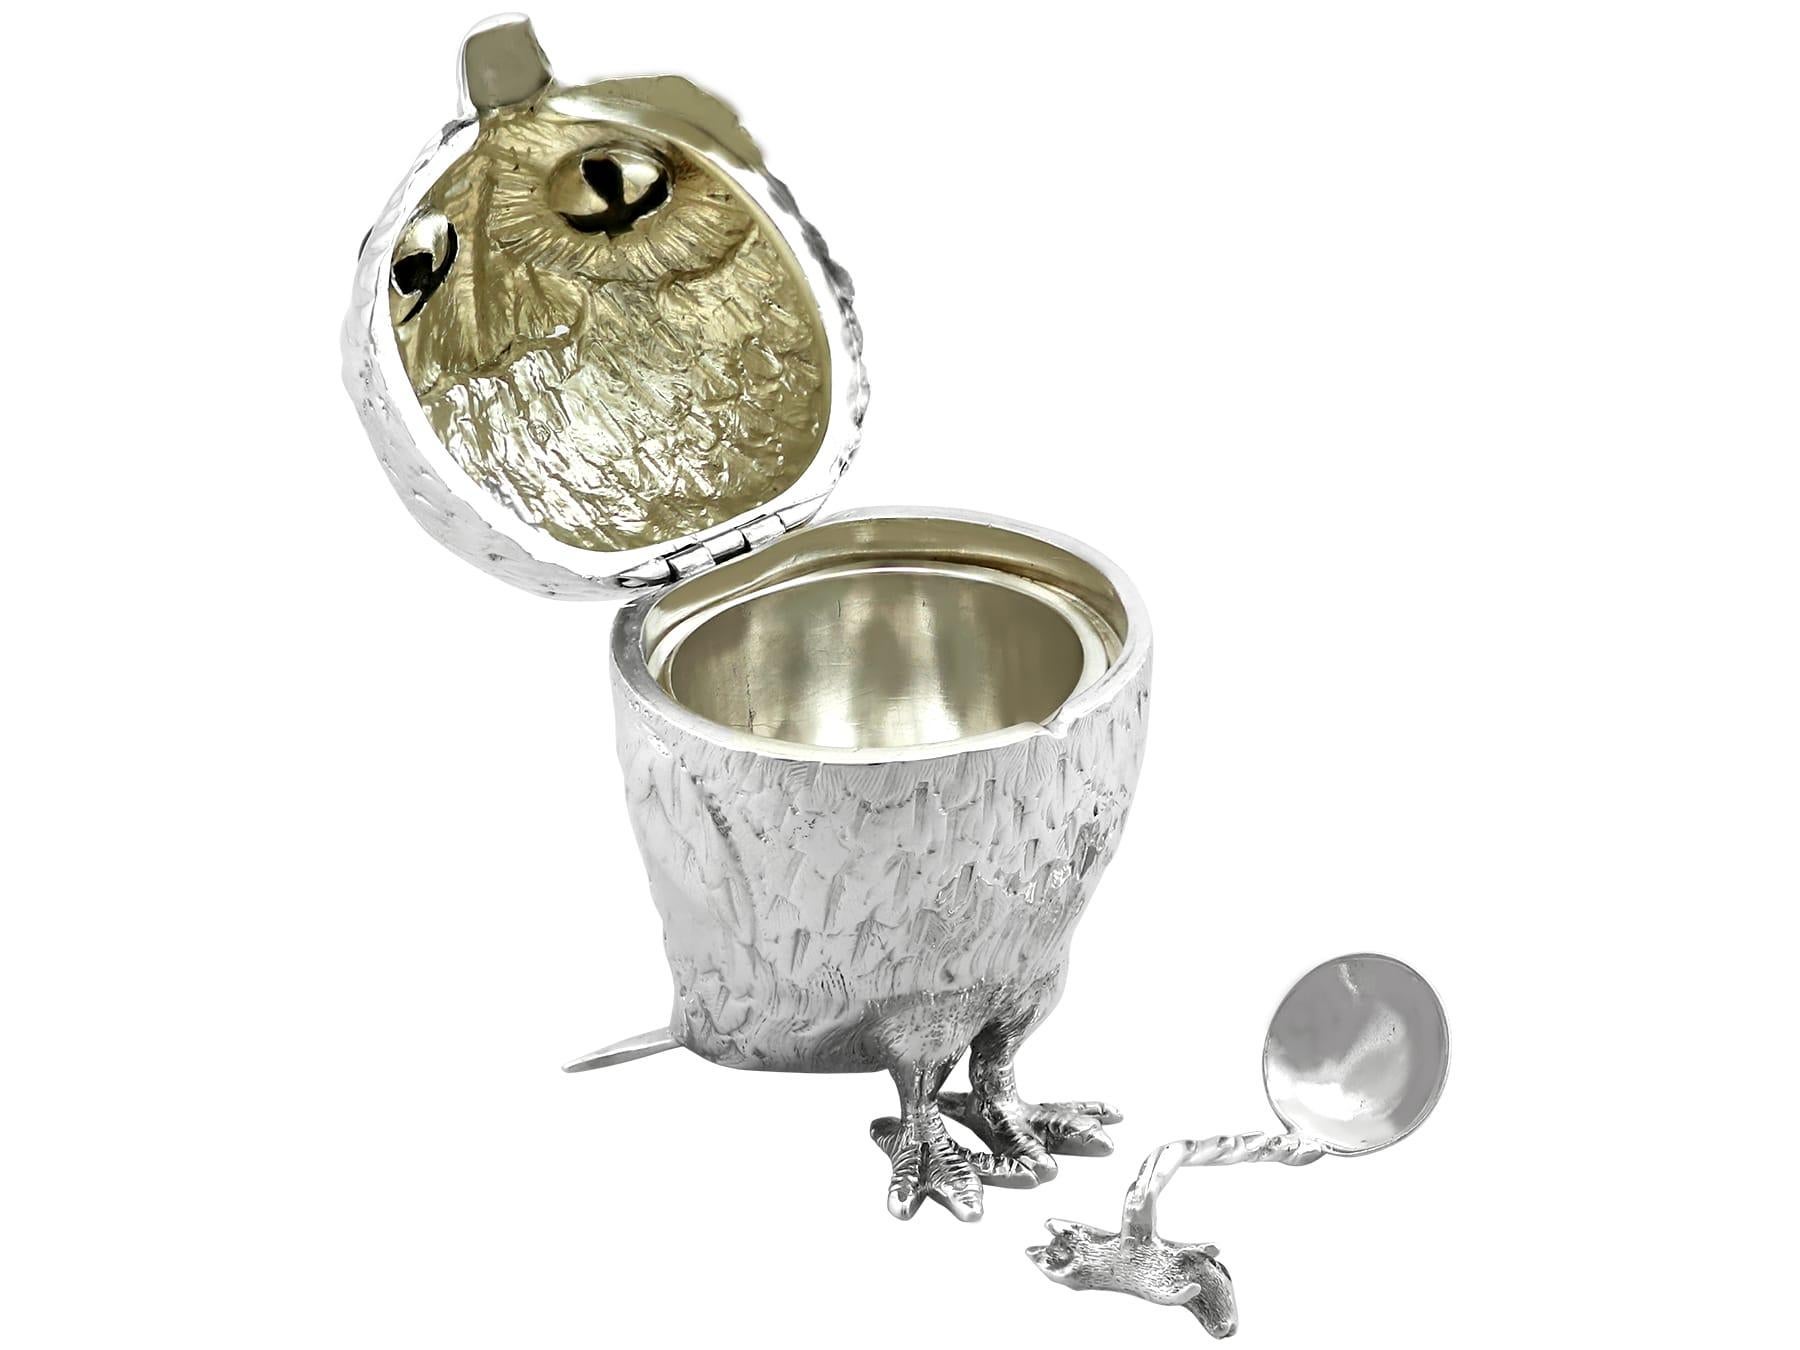 Antique Victorian Sterling Silver Owl Mustard Pot (1872) For Sale 2